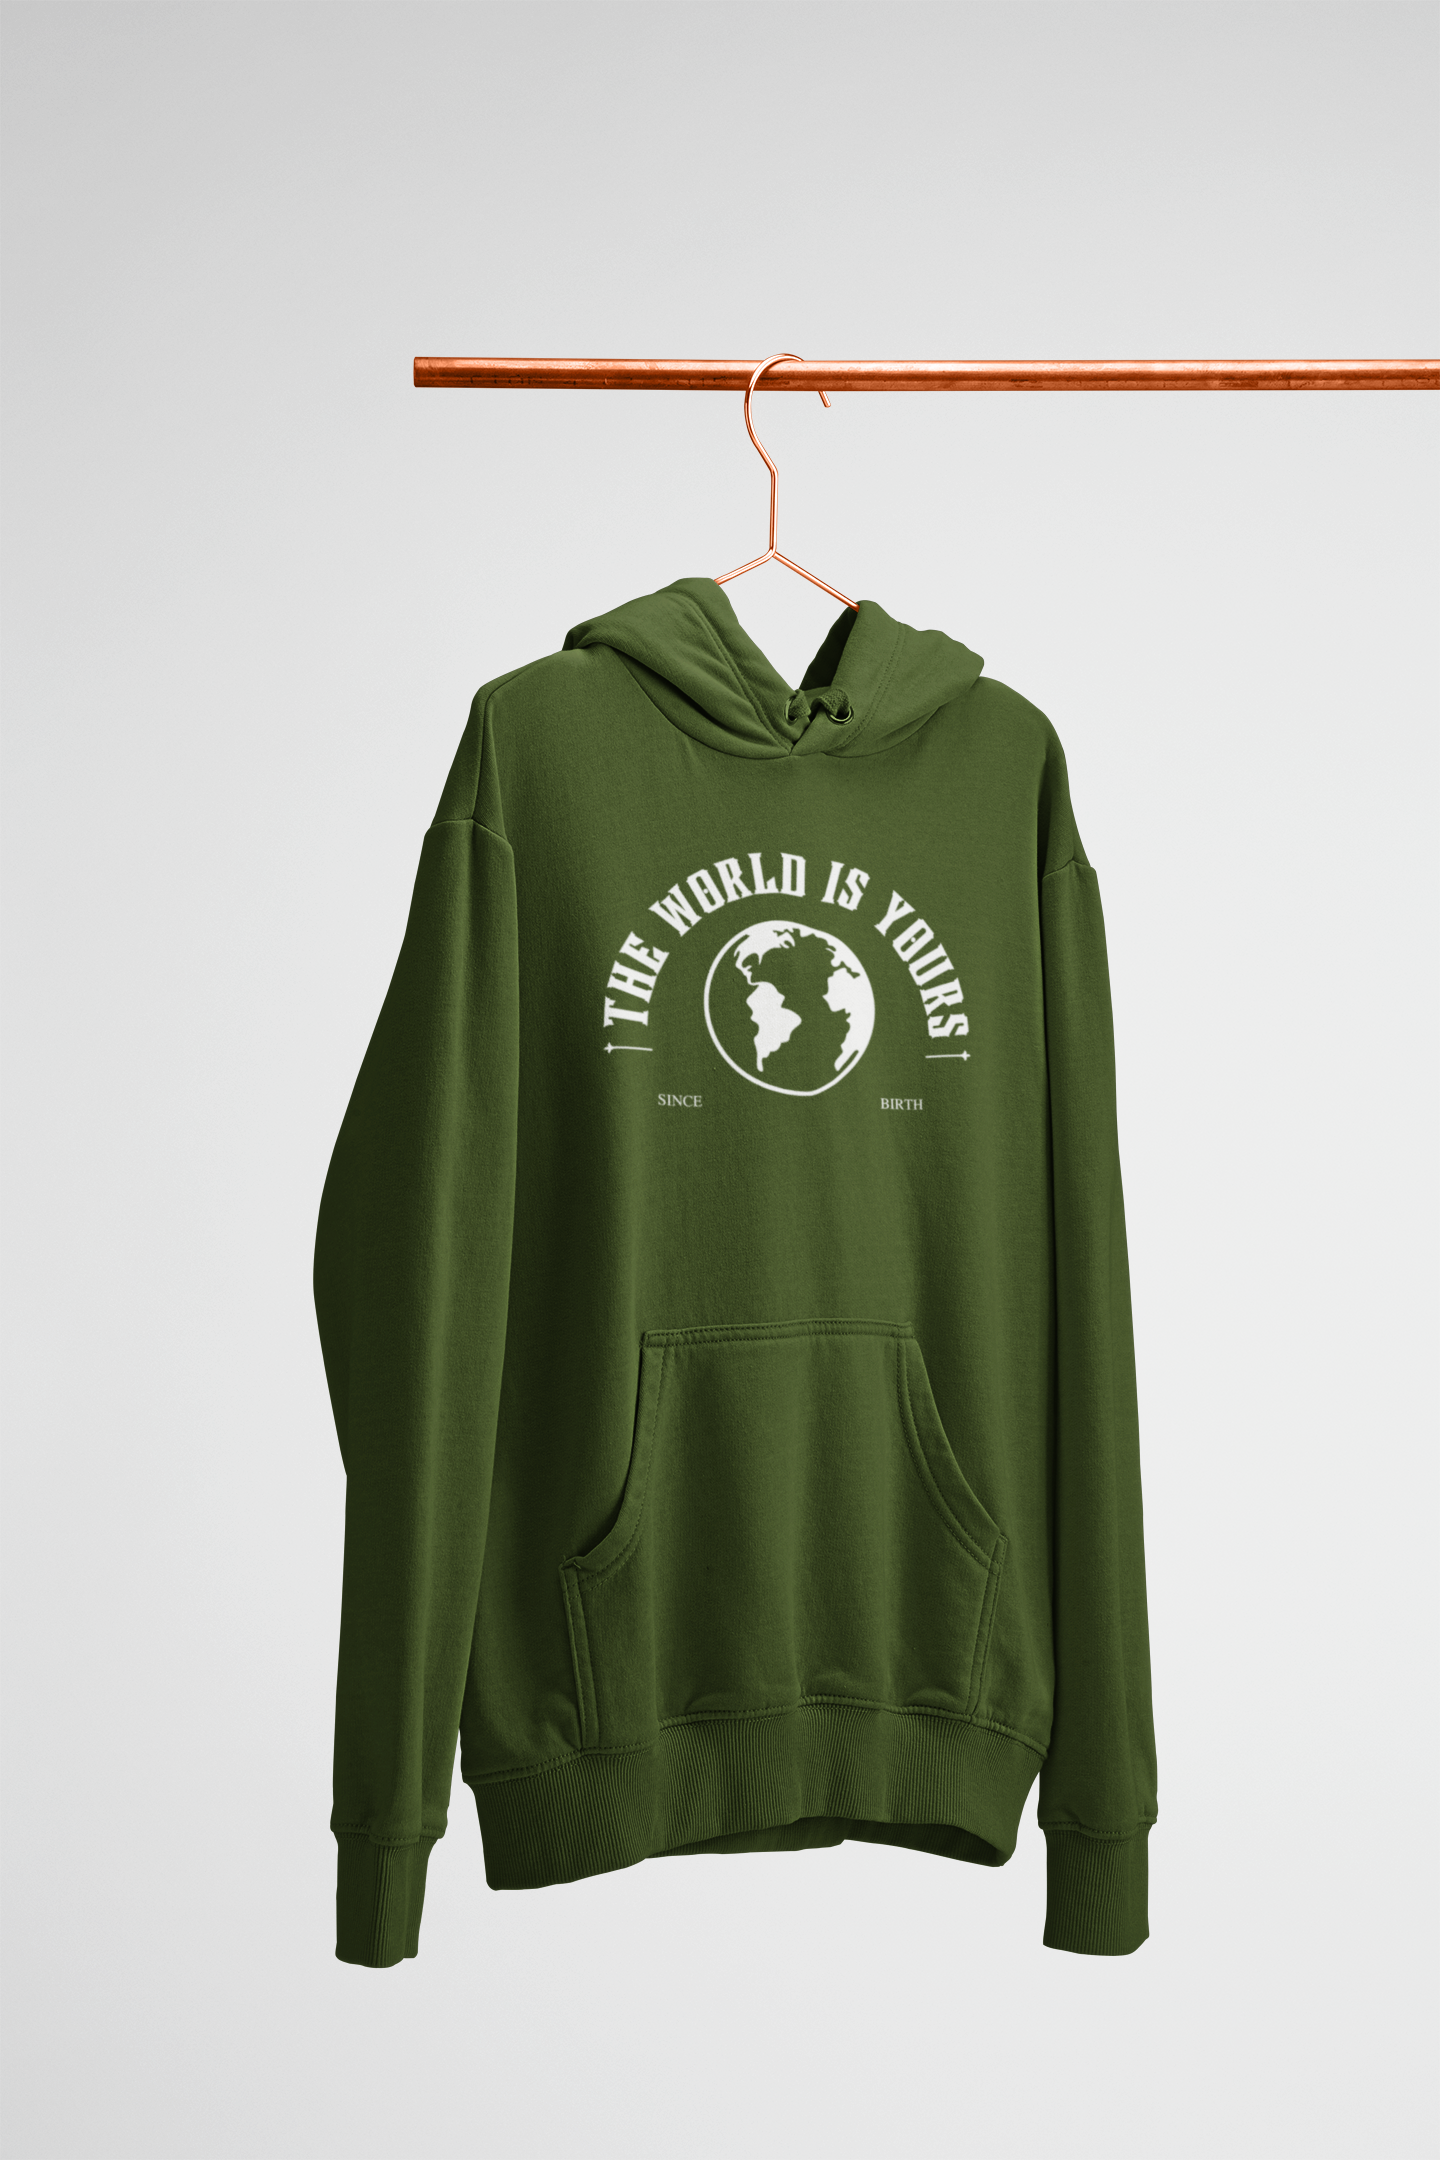 'The World is Yours' Hoodie